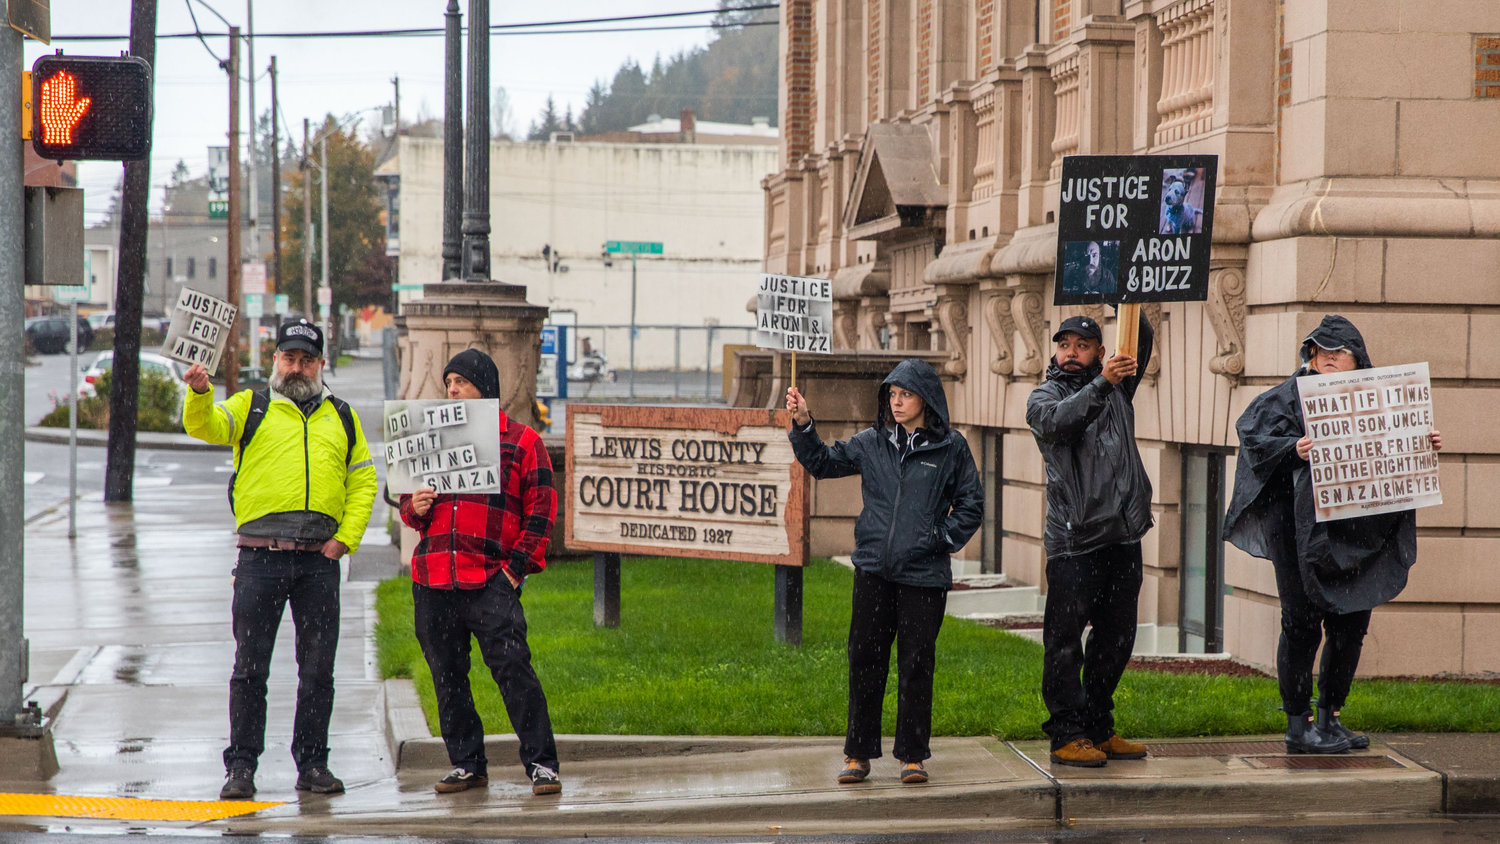 Demonstrators stand in the rain outside the Lewis County Law and Justice Center in Chehalis on Saturday while demanding justice for Aron Christensen and his dog Buzz.